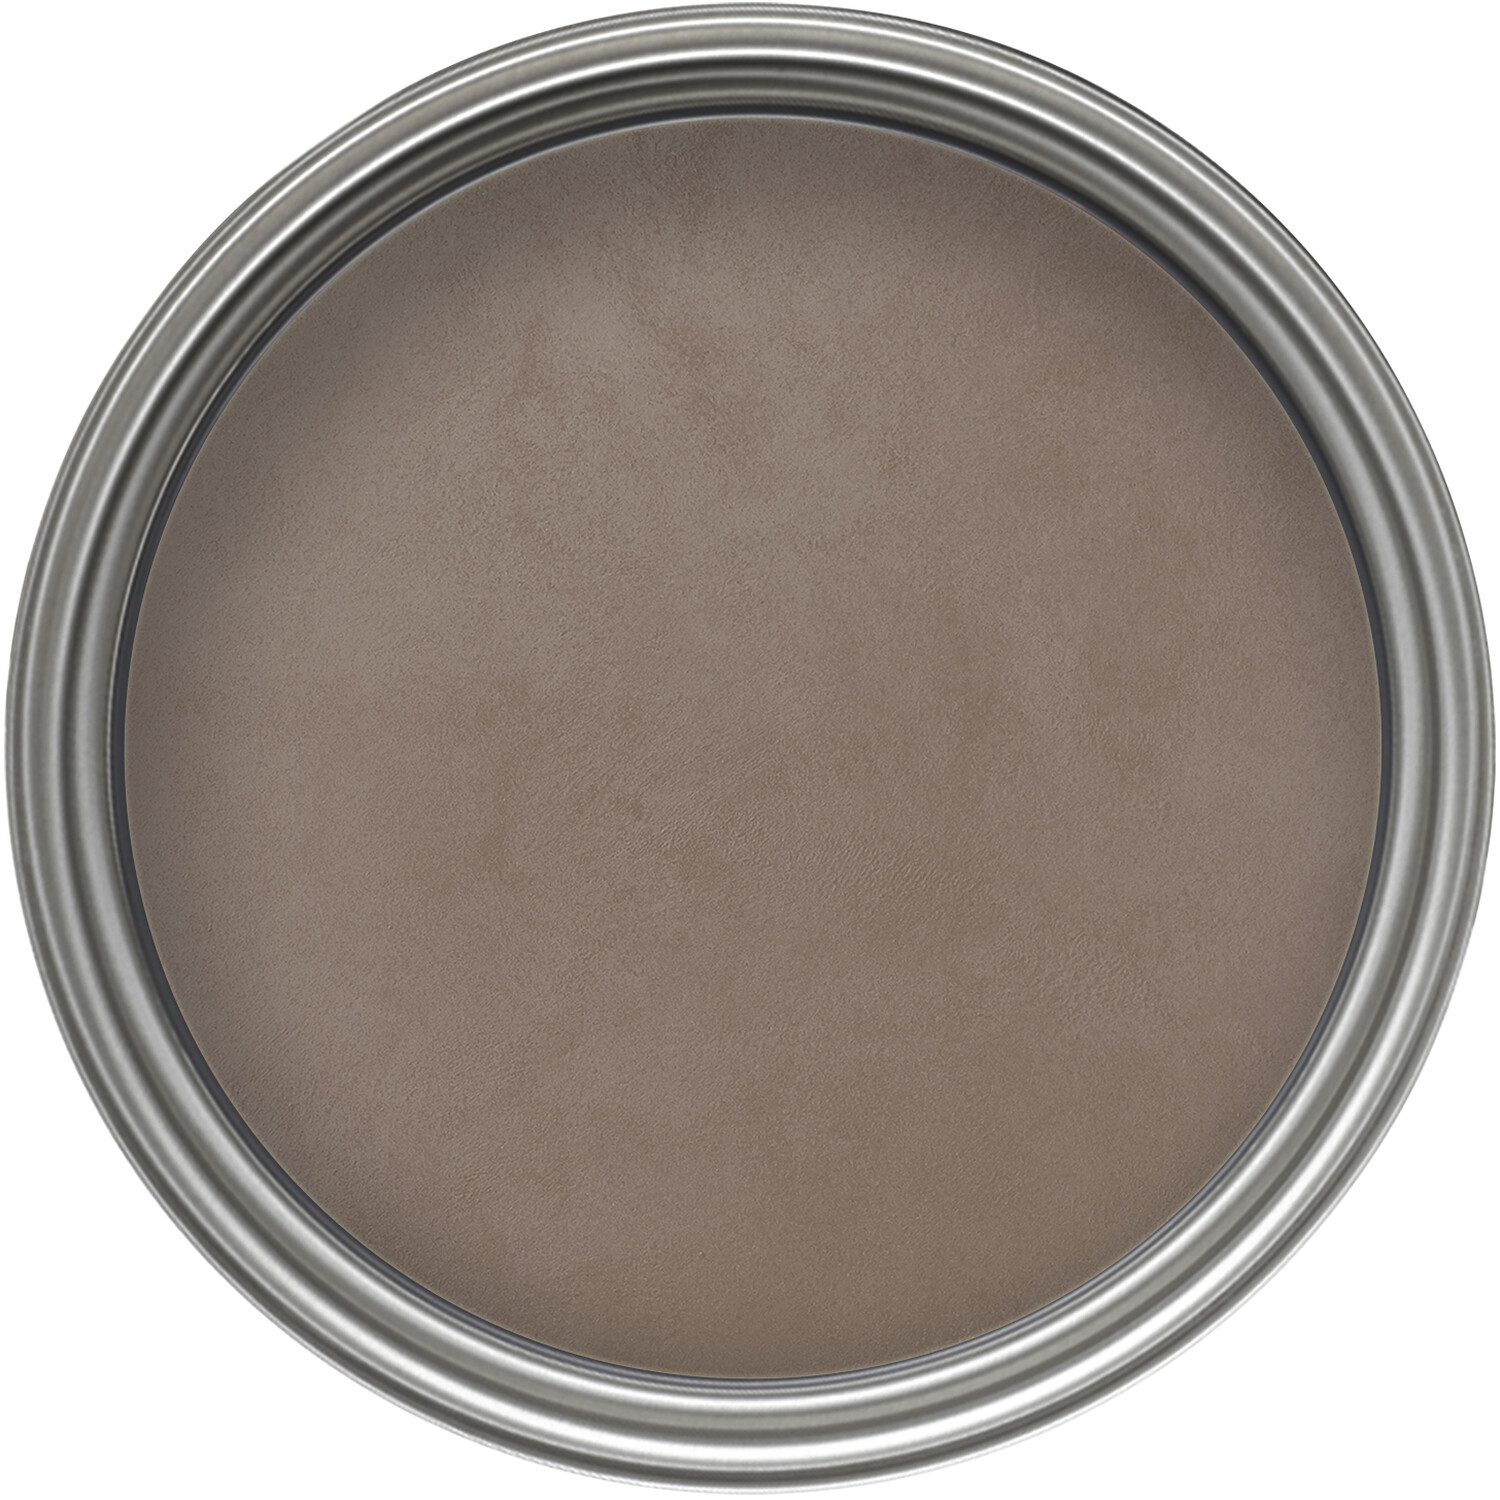 Crown Crafted Walls Chocolate Suede Textured Finish Paint 2.5L Image 3